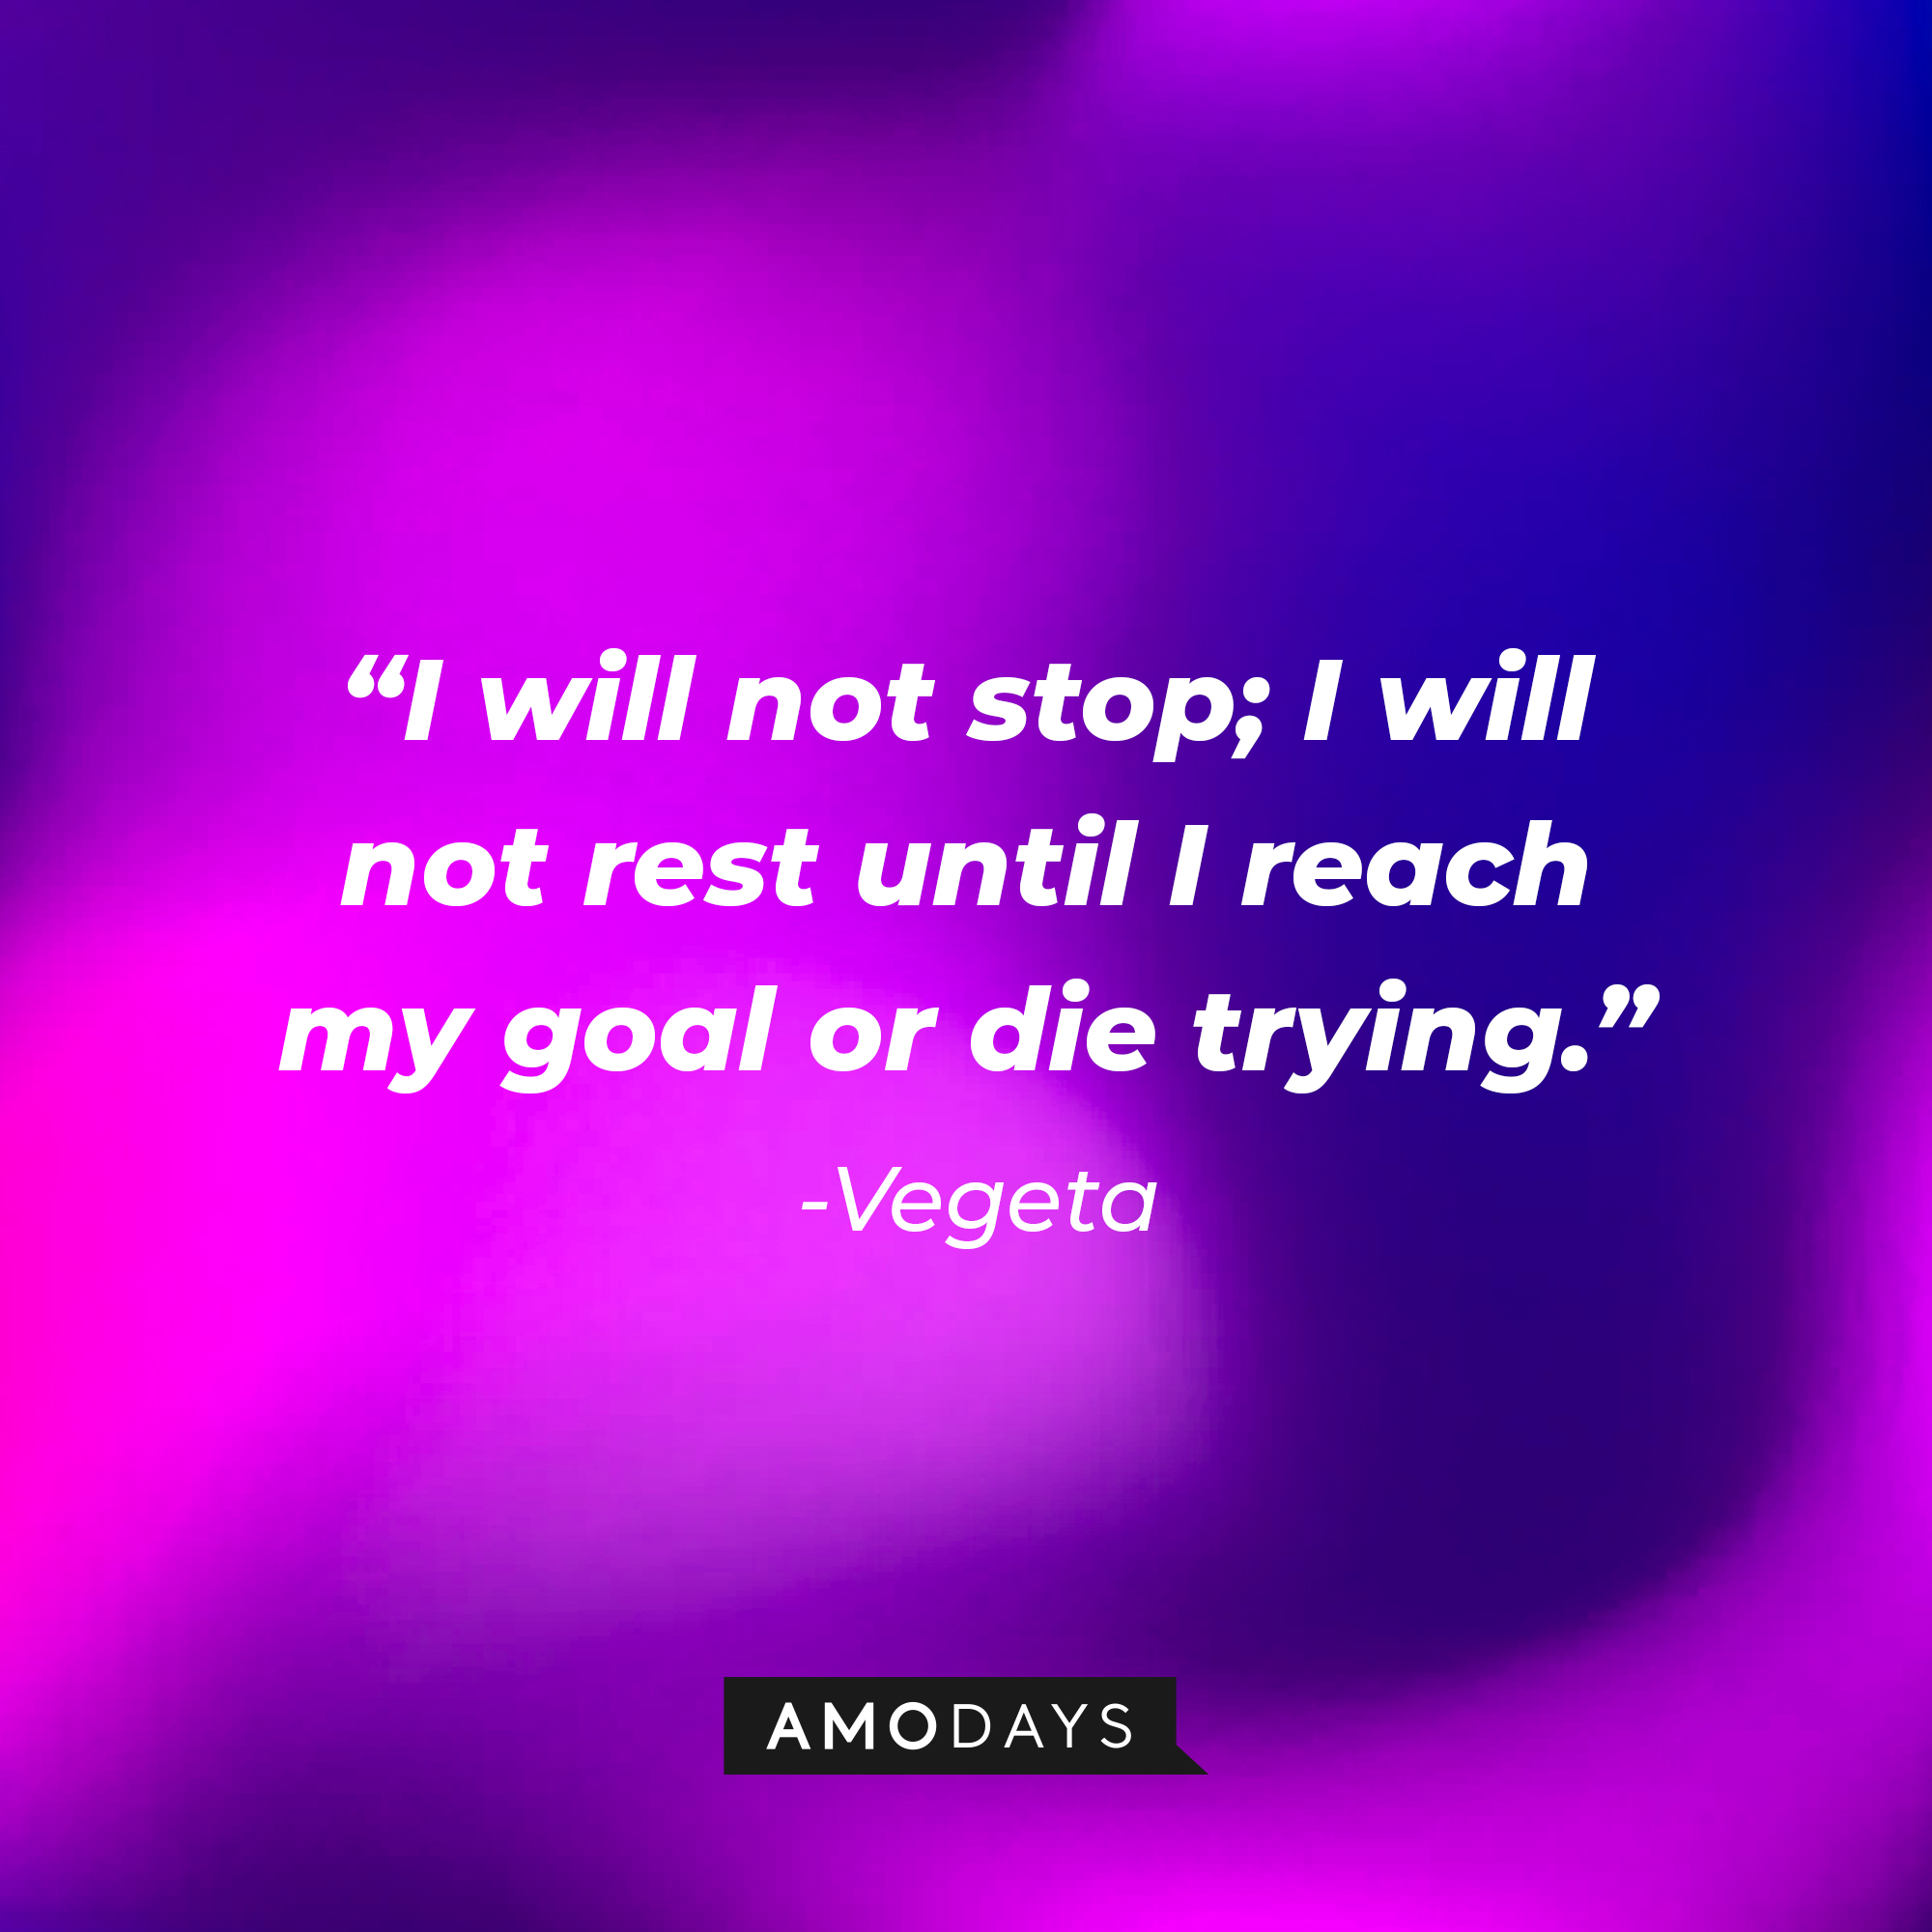 Vegeta’s quote: “I will not stop; I will not rest until I reach my goal or die trying.” | Source: AmoDays